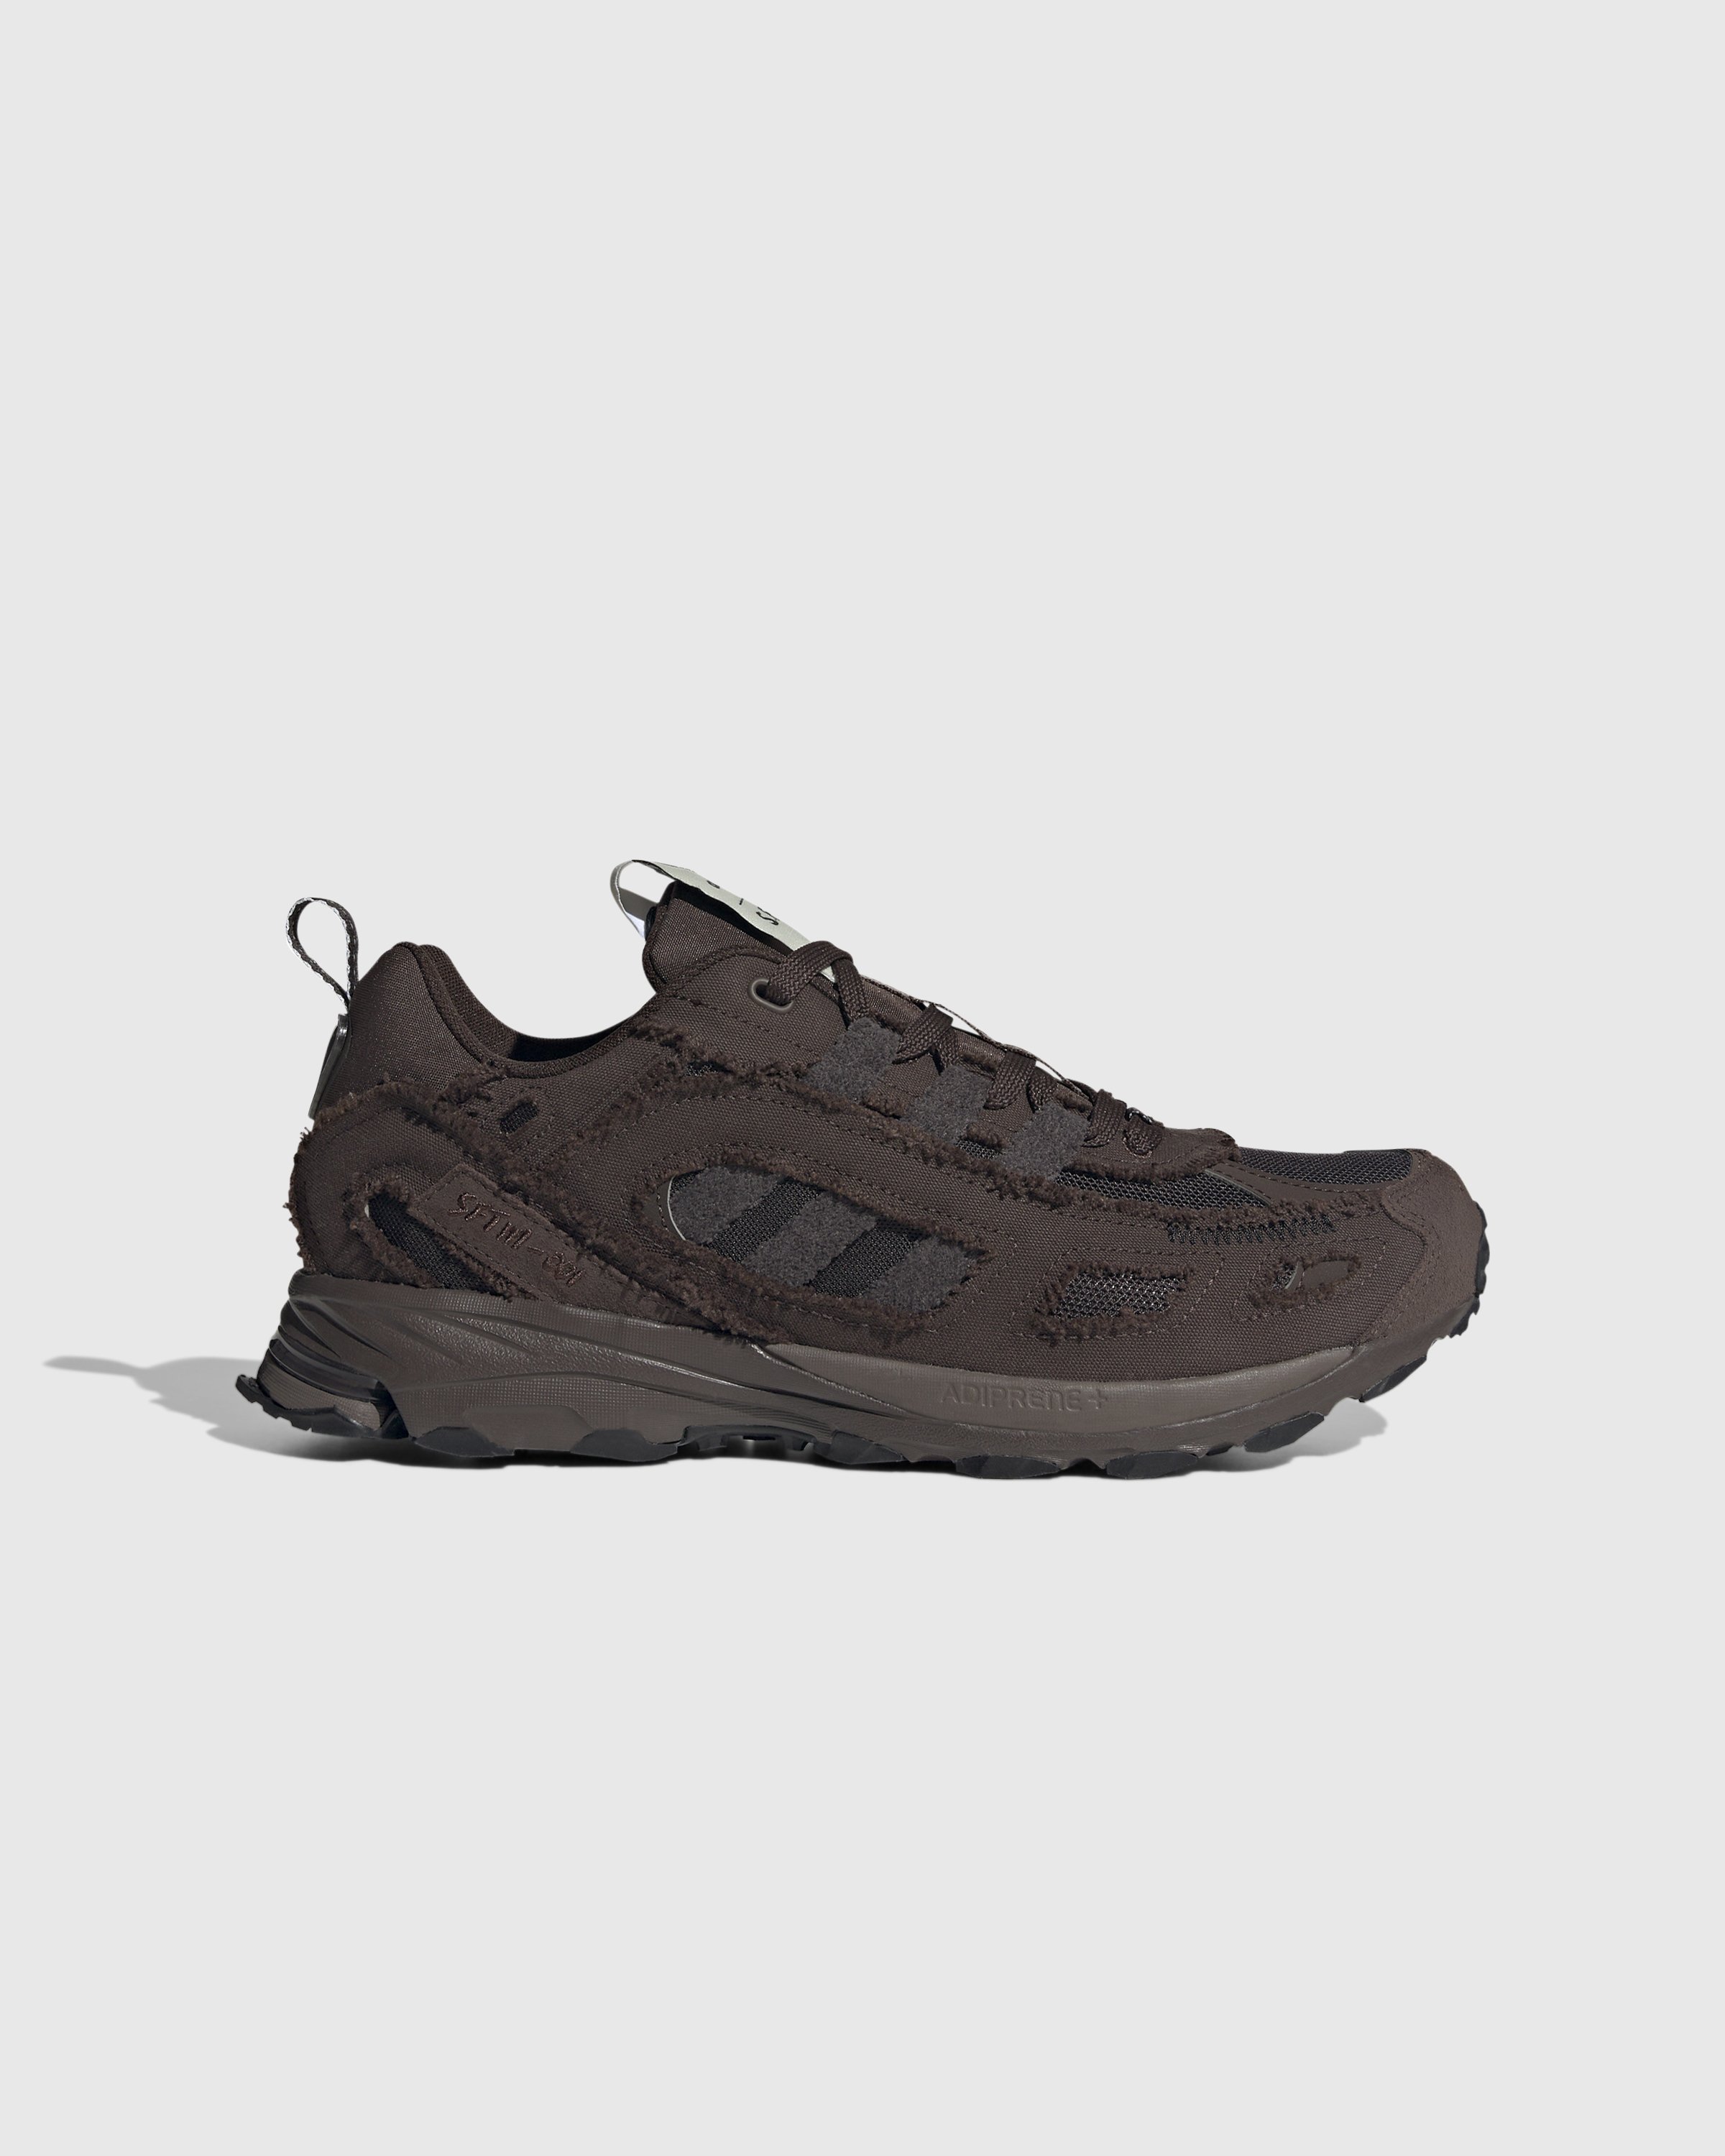 Song For The Mute x Adidas – Shadowturf SFTM Brown | Highsnobiety Shop